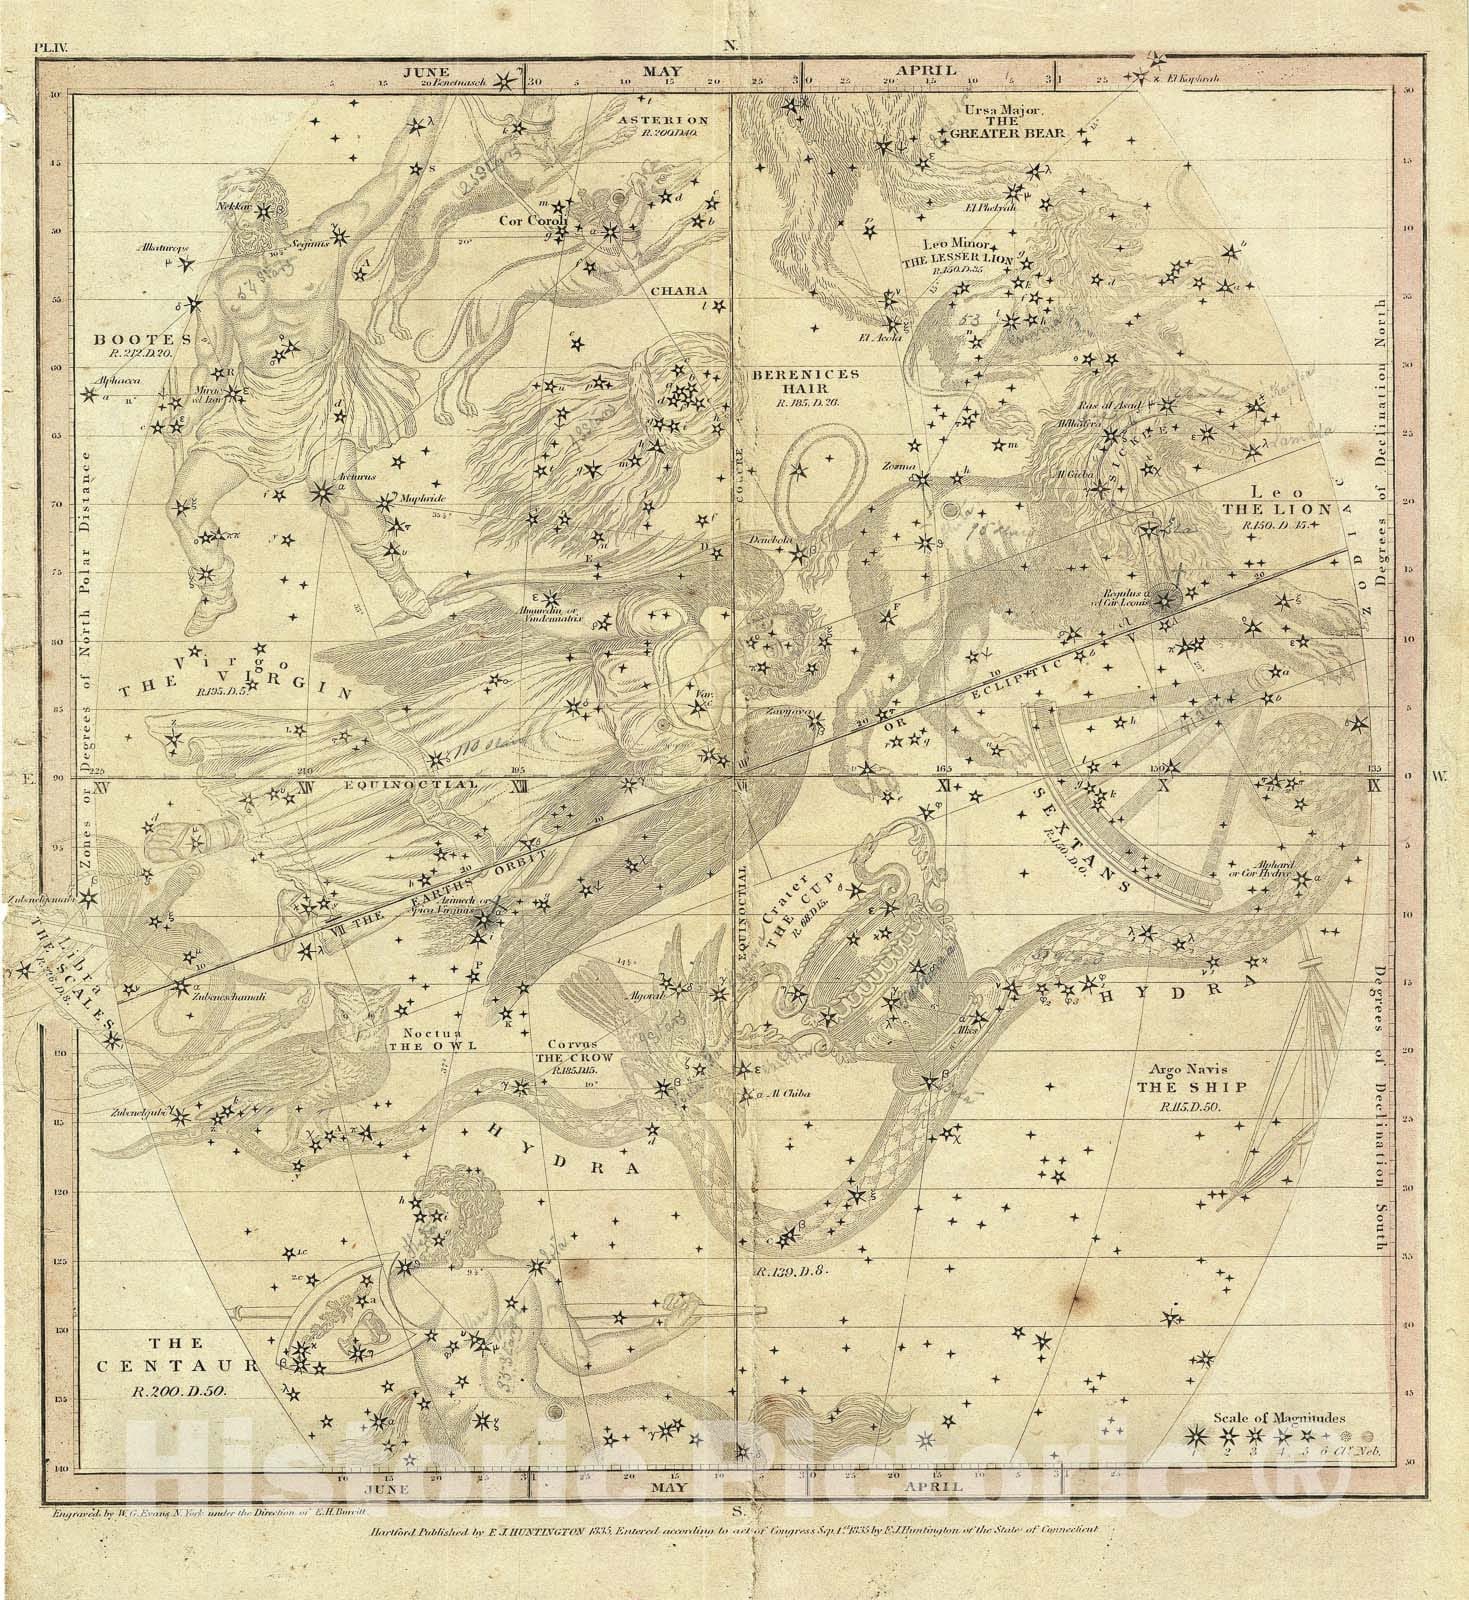 Historic Map : The Constellations or Stars in June, May and April, Burritt - Huntington, 1835, Vintage Wall Art